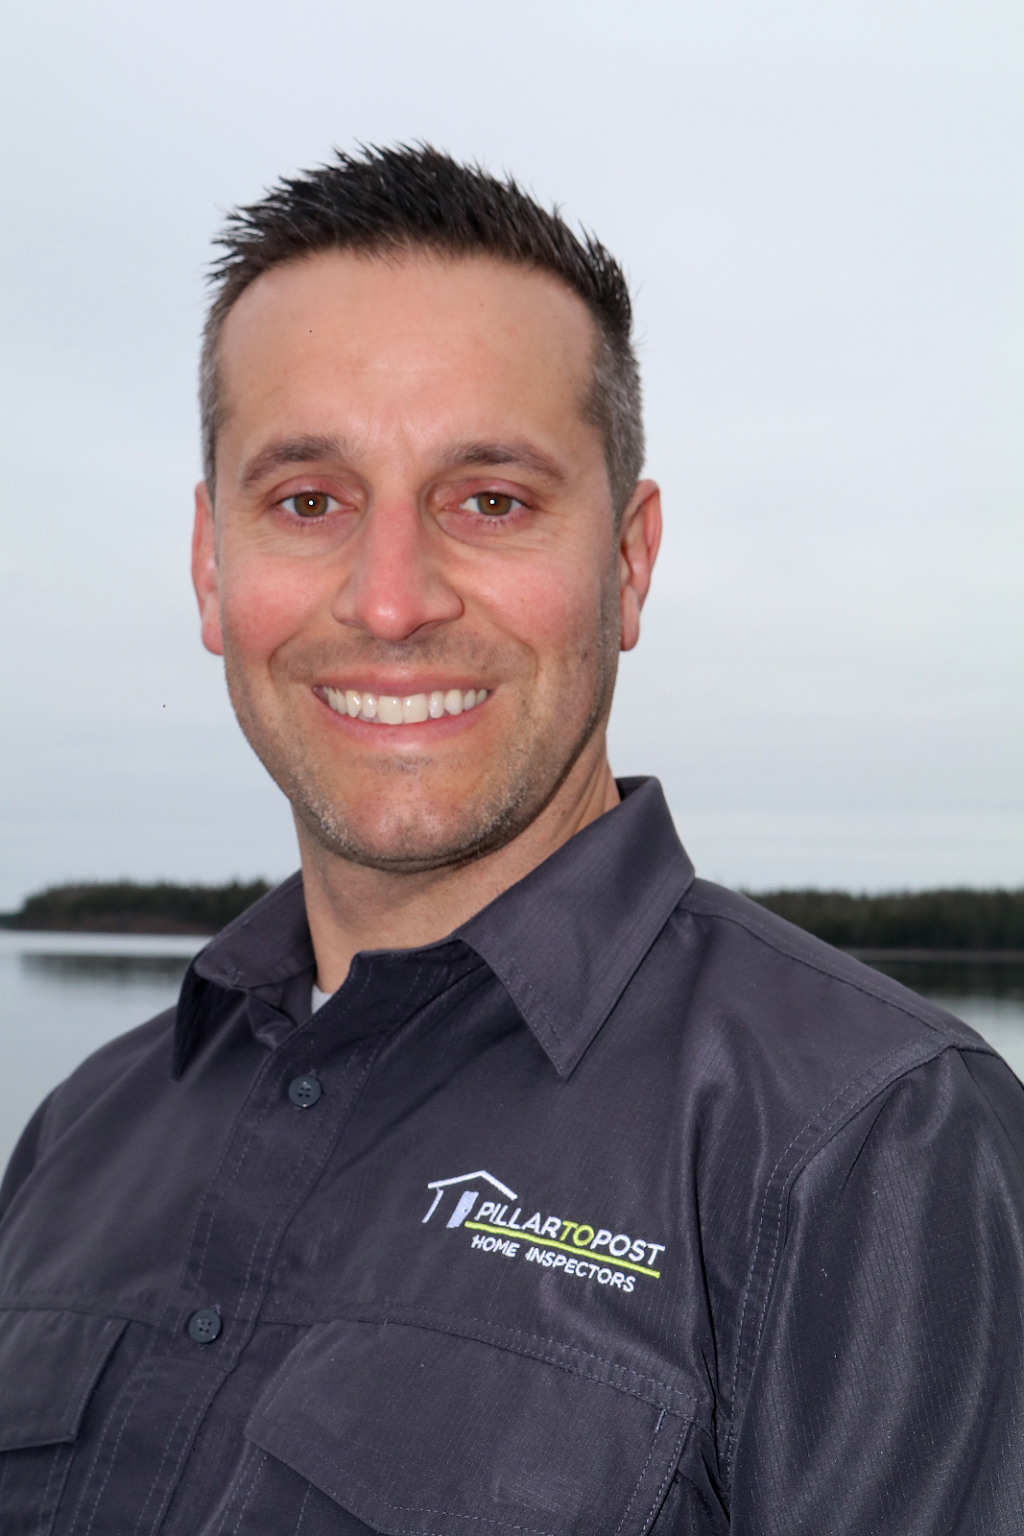 Pillar To Post Home Inspectors - The Ryan Barry Team | 1 David Dr, Lawrencetown, NS B2Z 1R7, Canada | Phone: (902) 452-8858